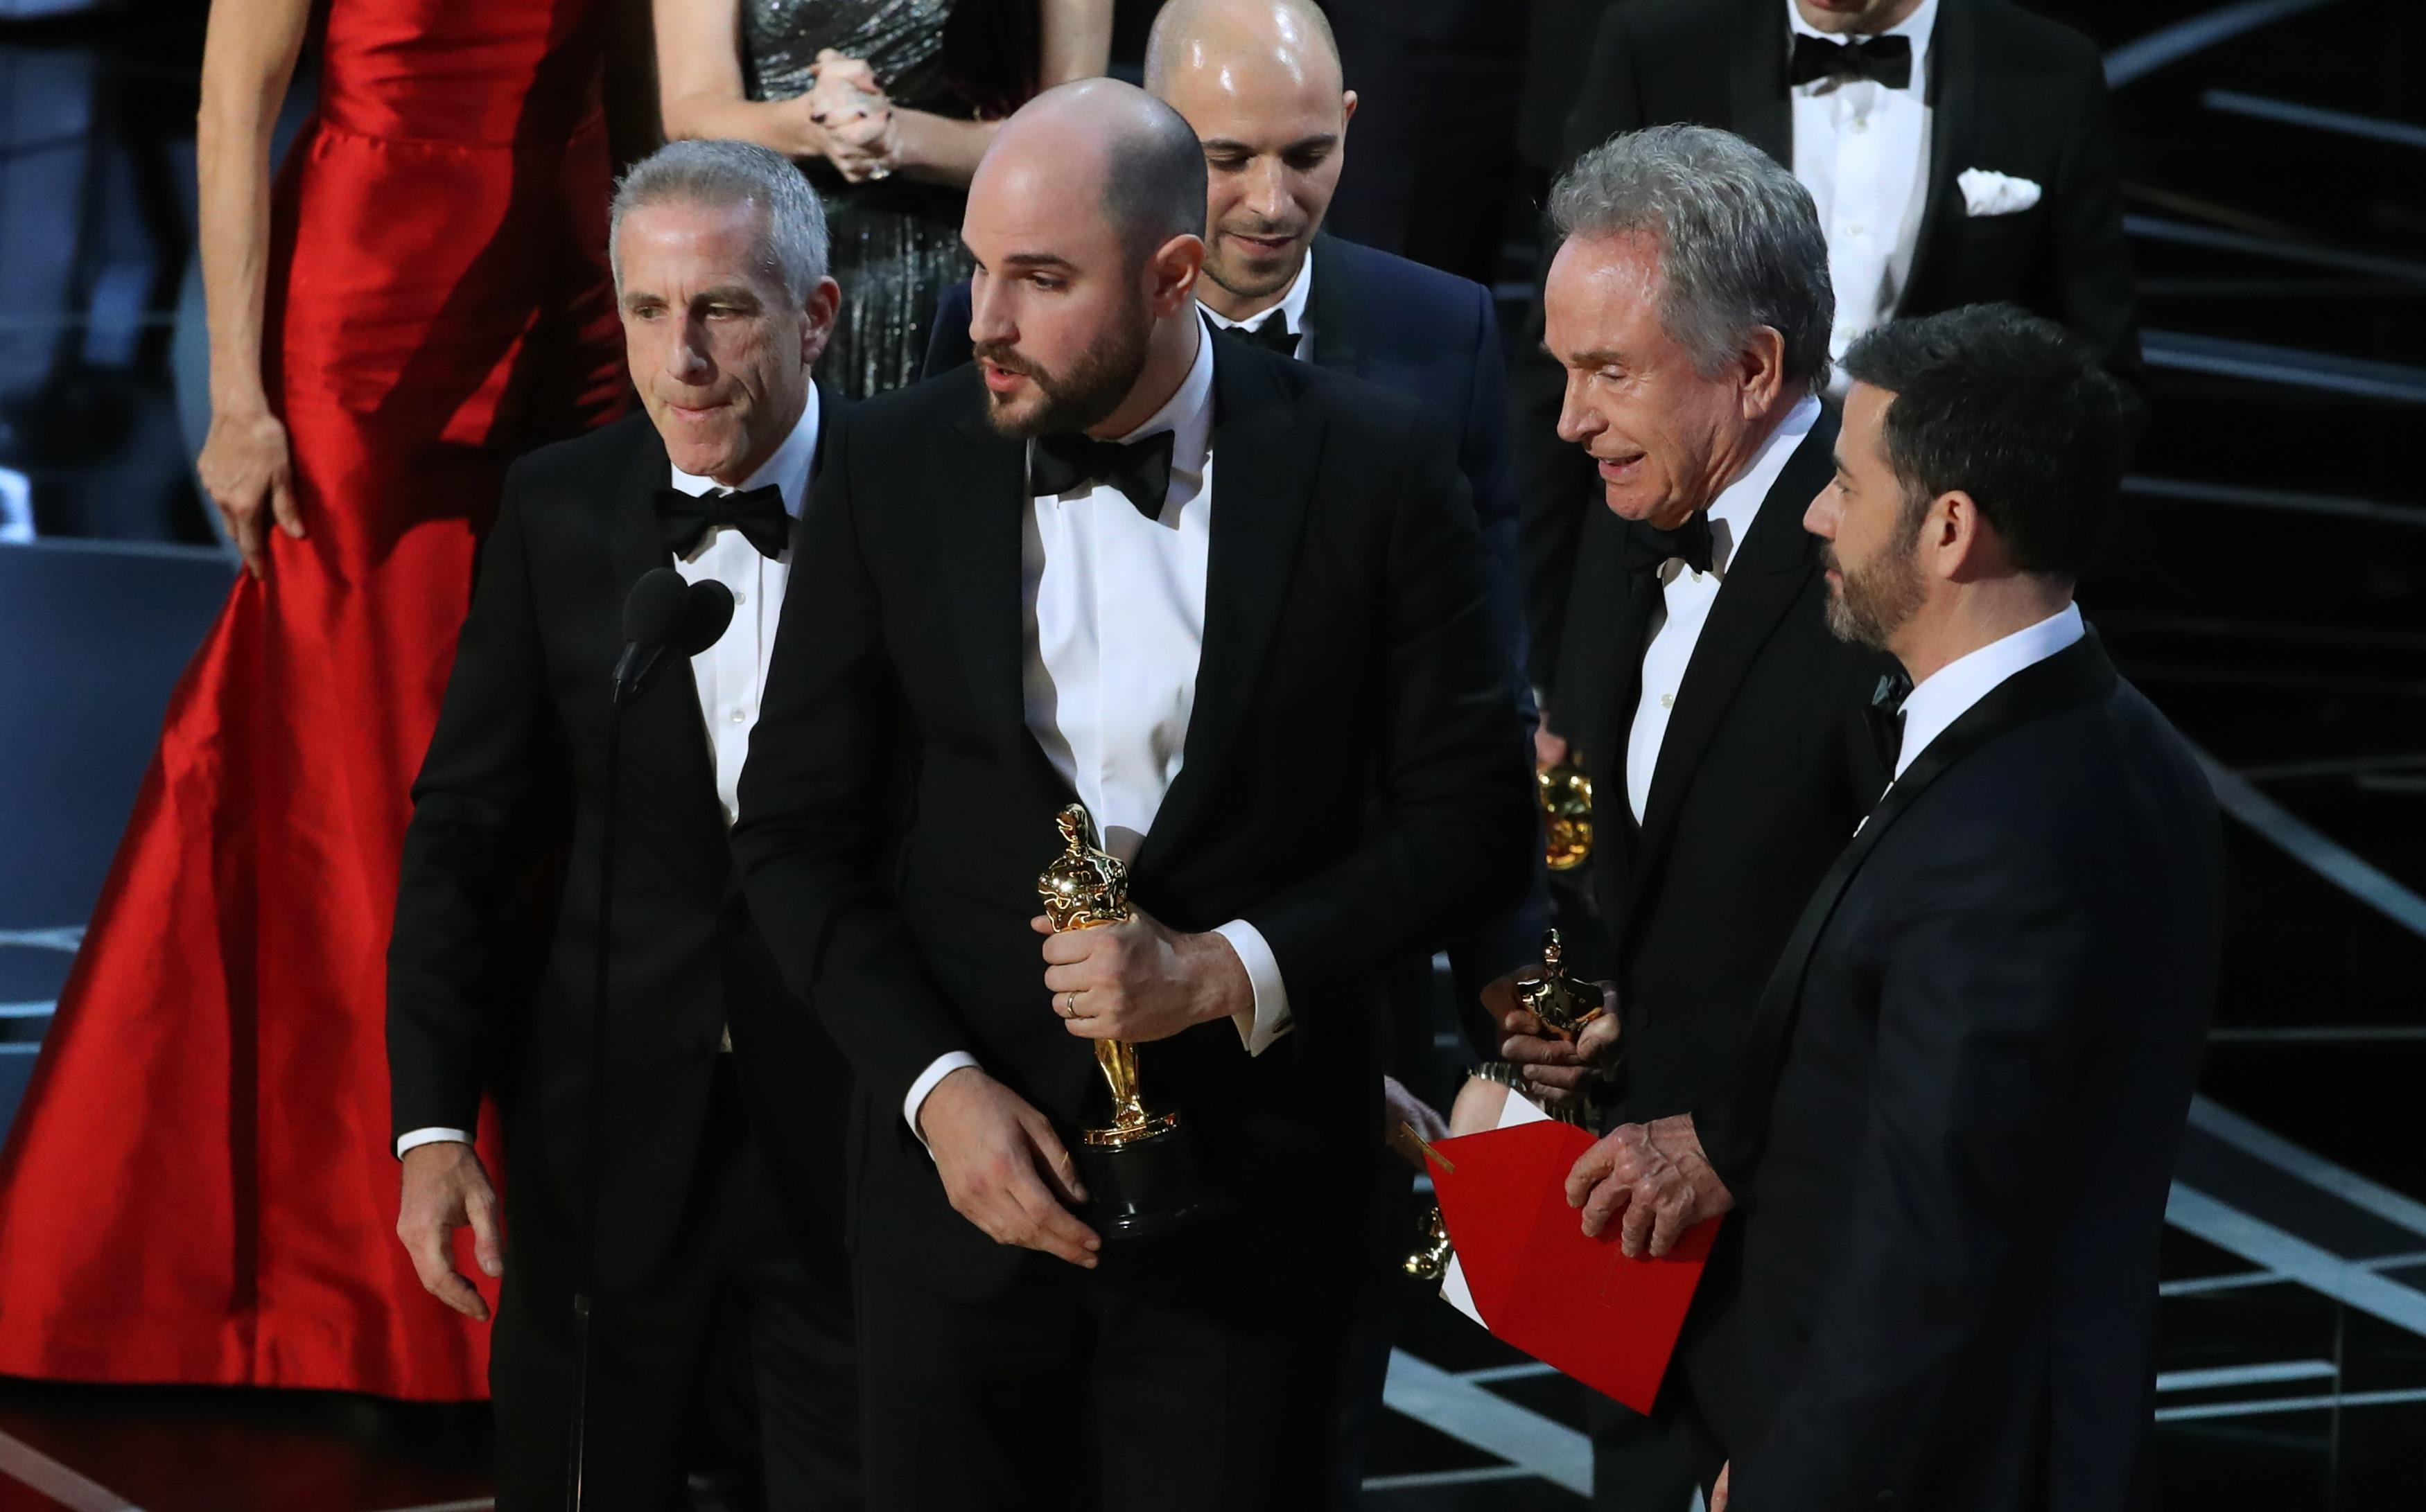 Pwc Reputation On The Line After Oscars Best Picture Gaffe Cbs News